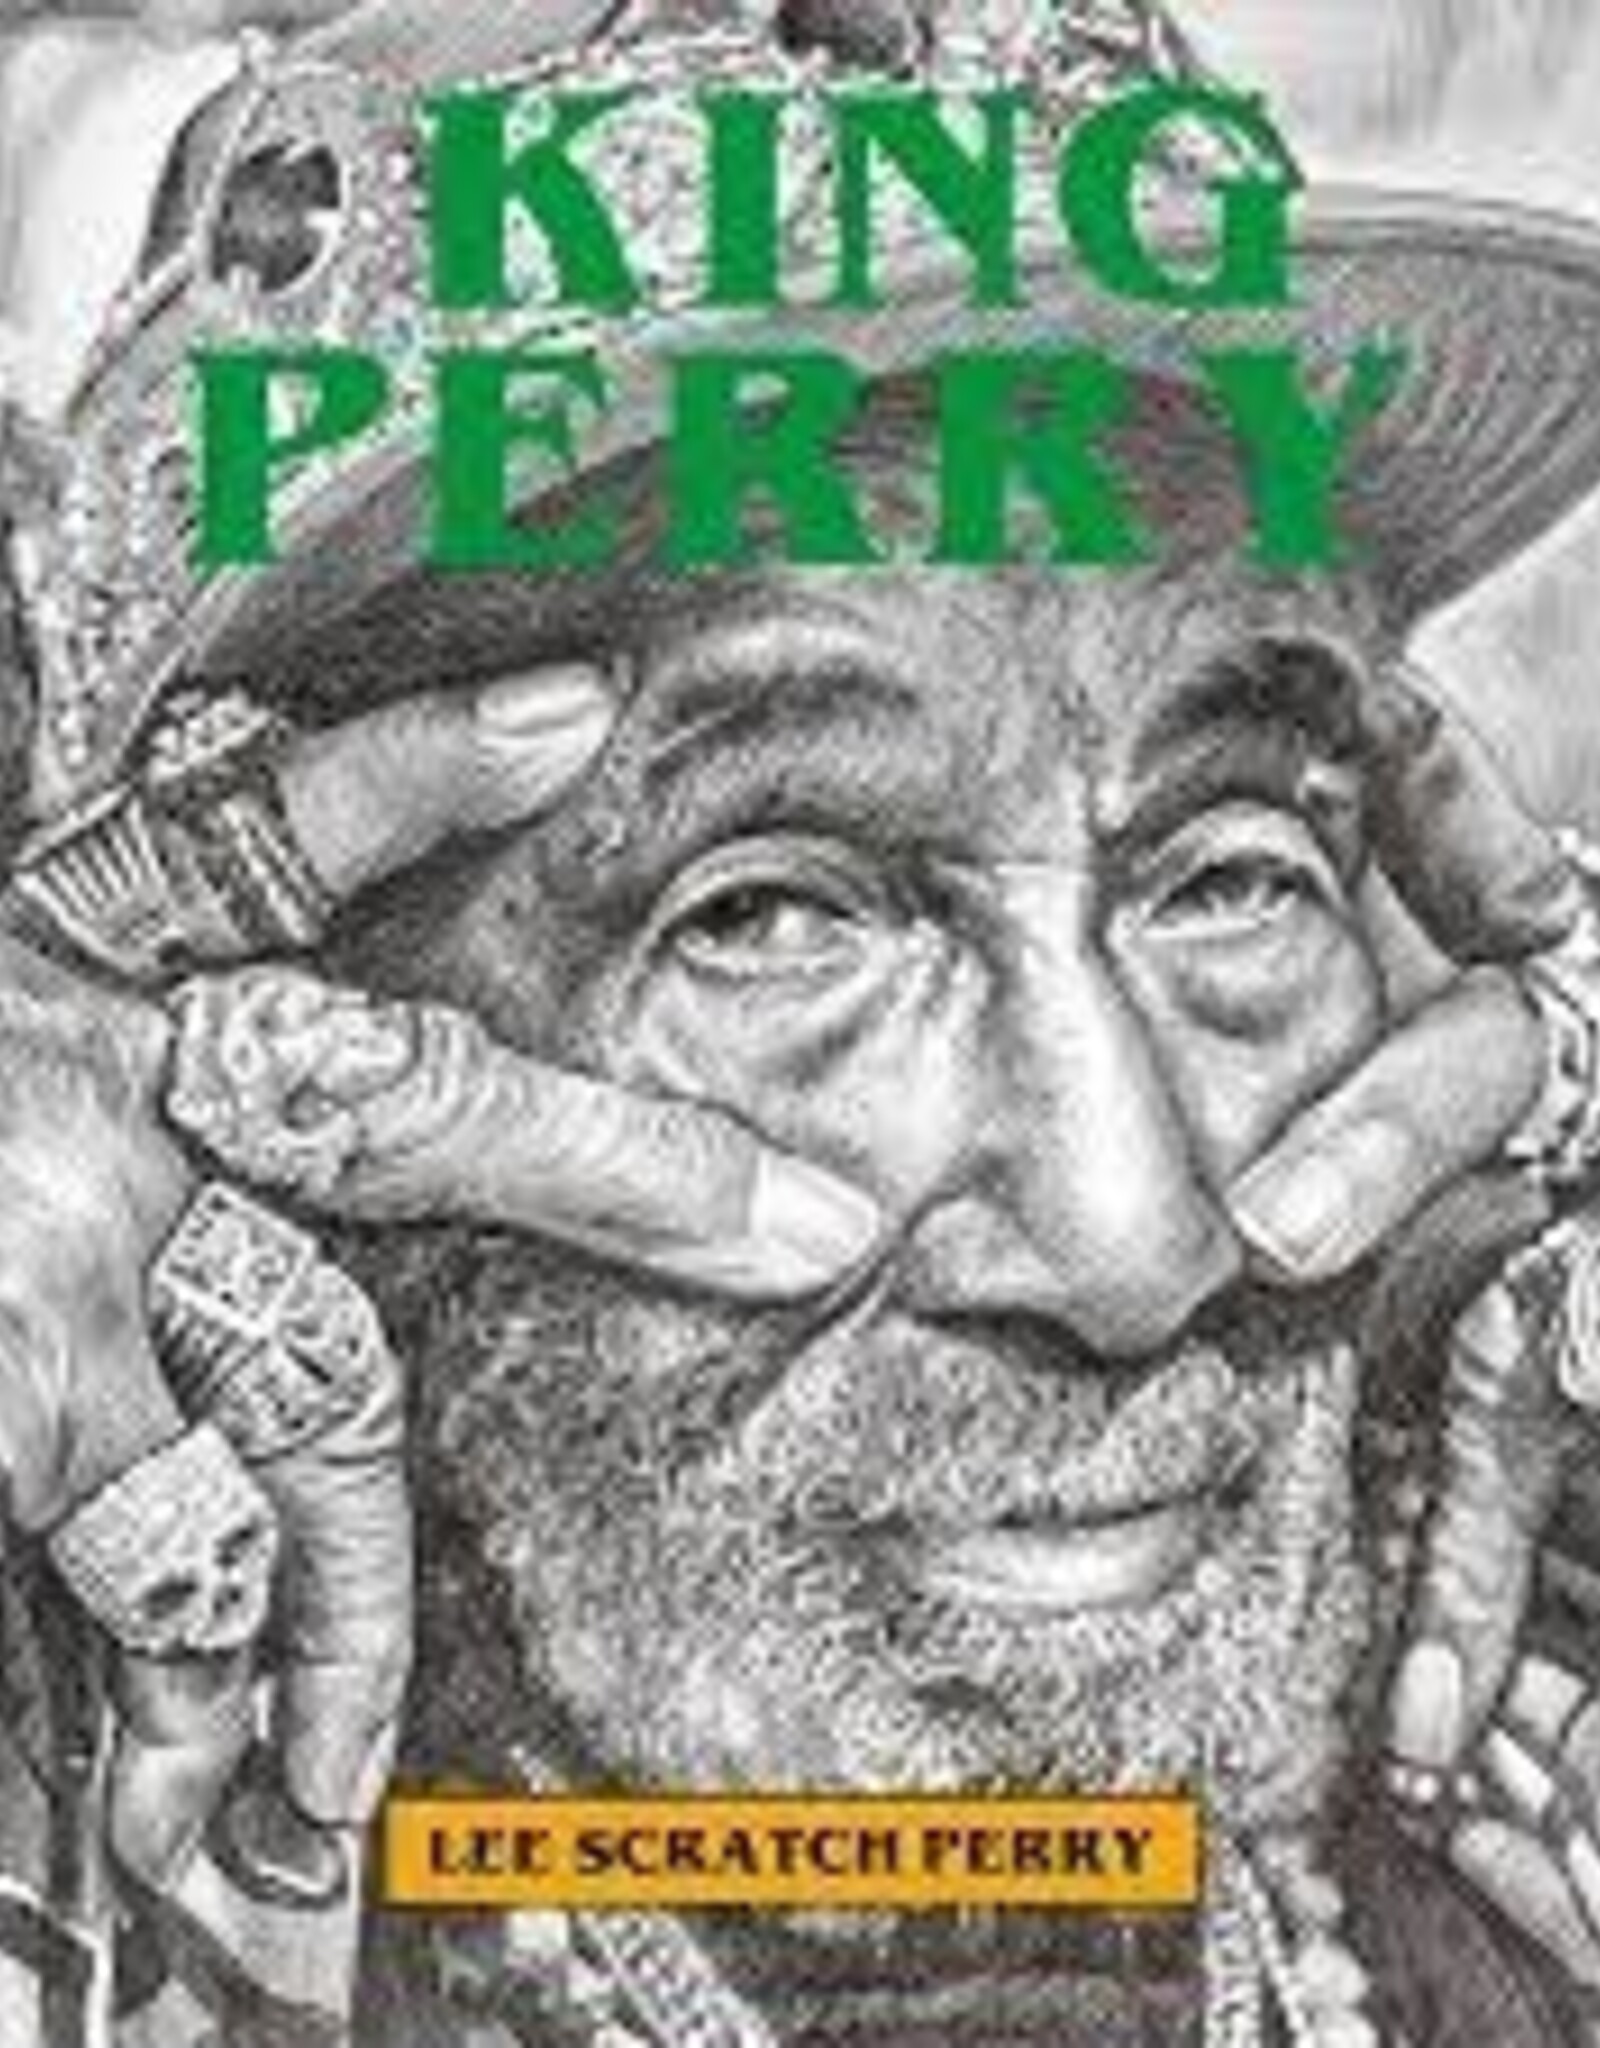 Perry, Lee "Scratch" - King Perry